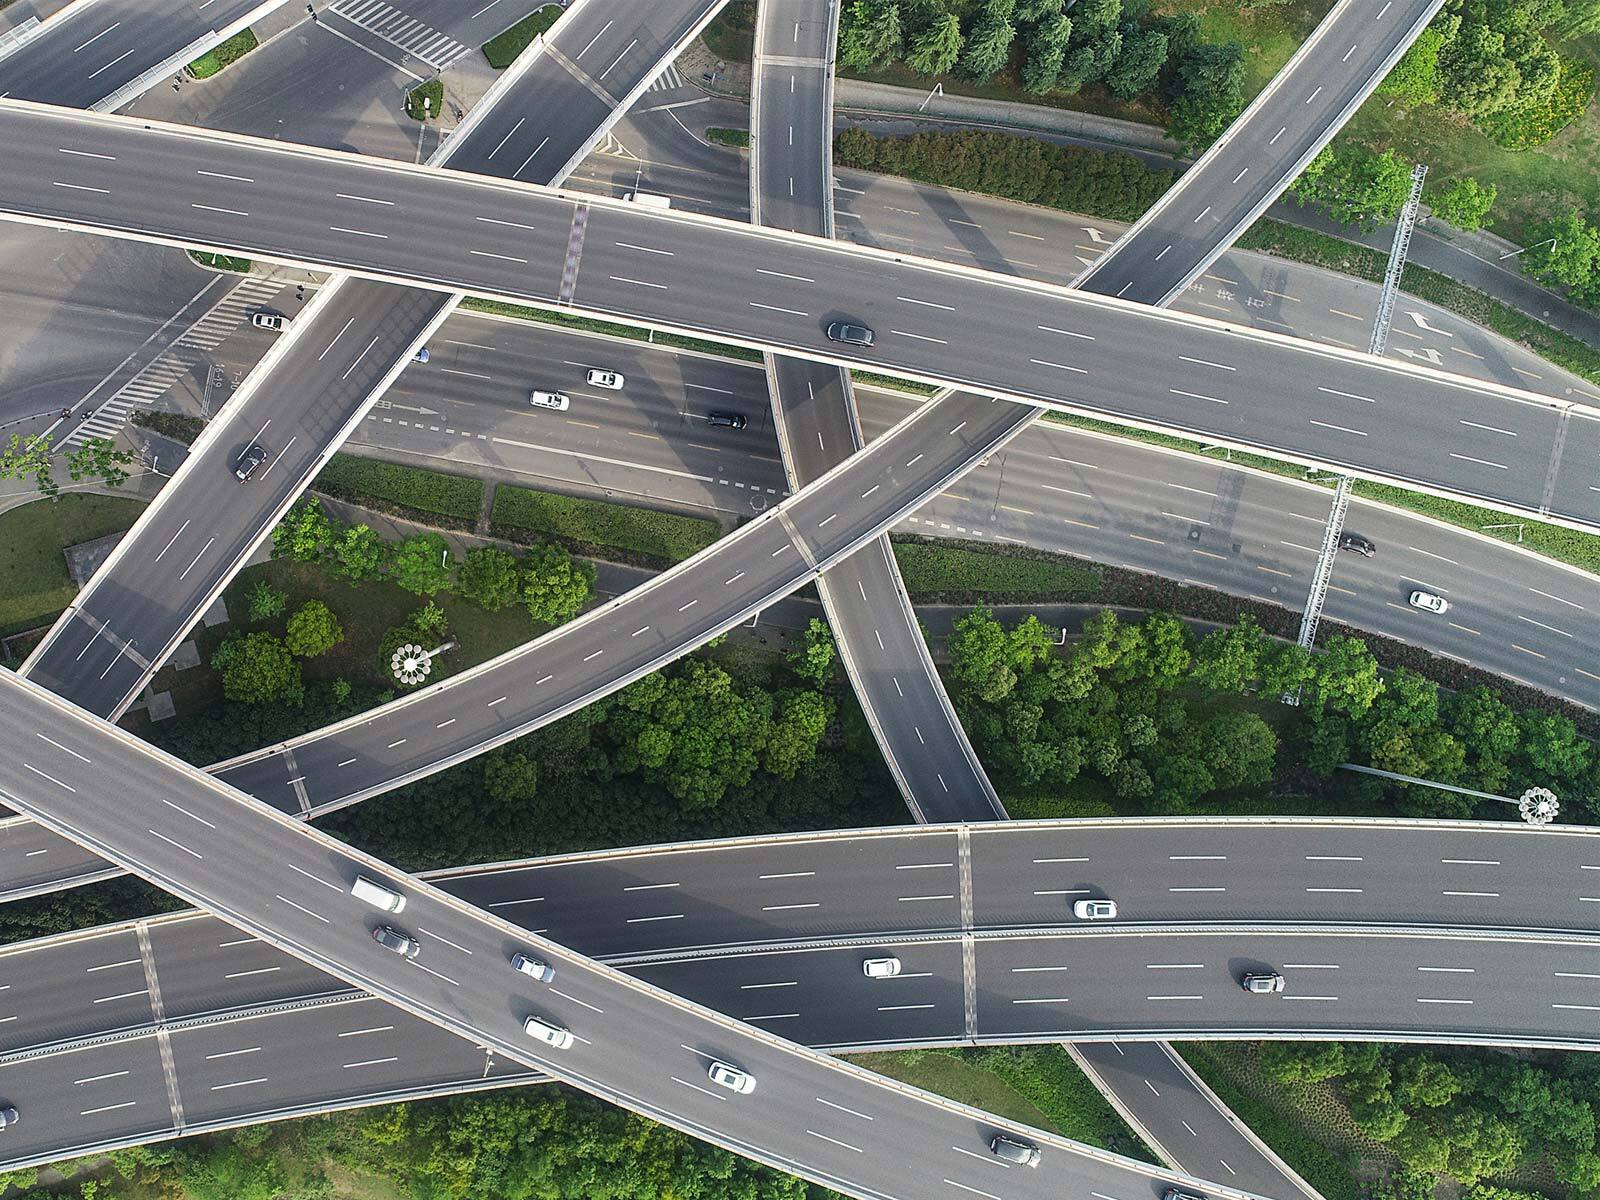 Aerial view of a highway system with cars on the road